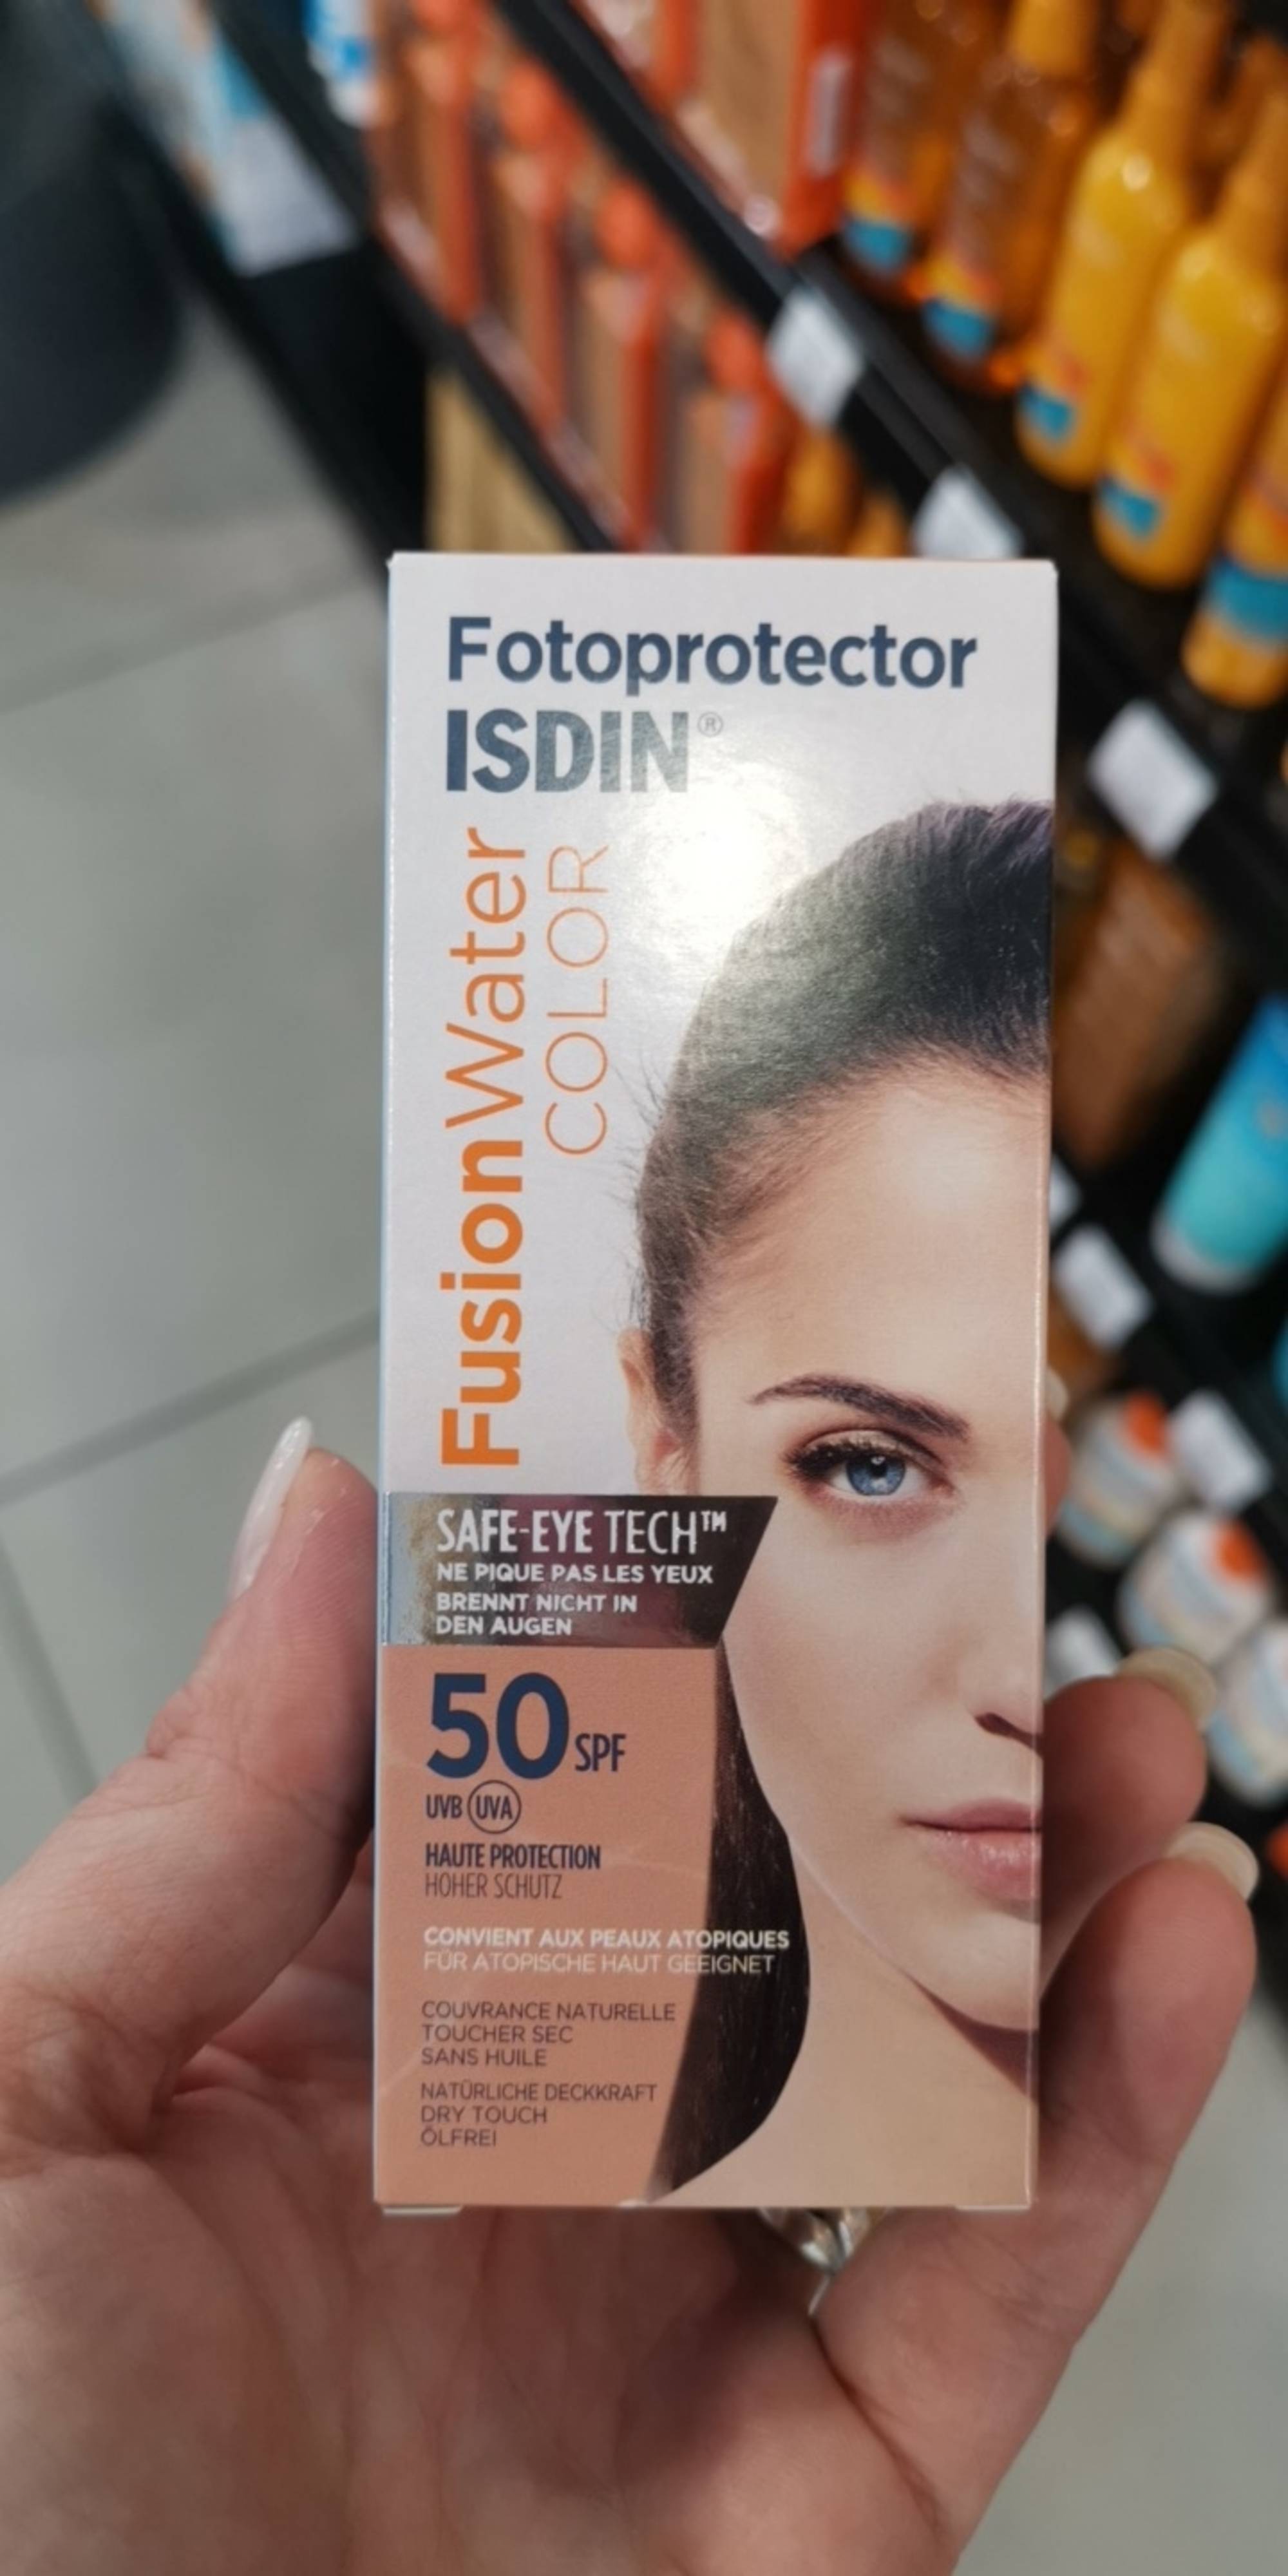 ISDIN - Fotoprotector - Fusion water color 50 SPF